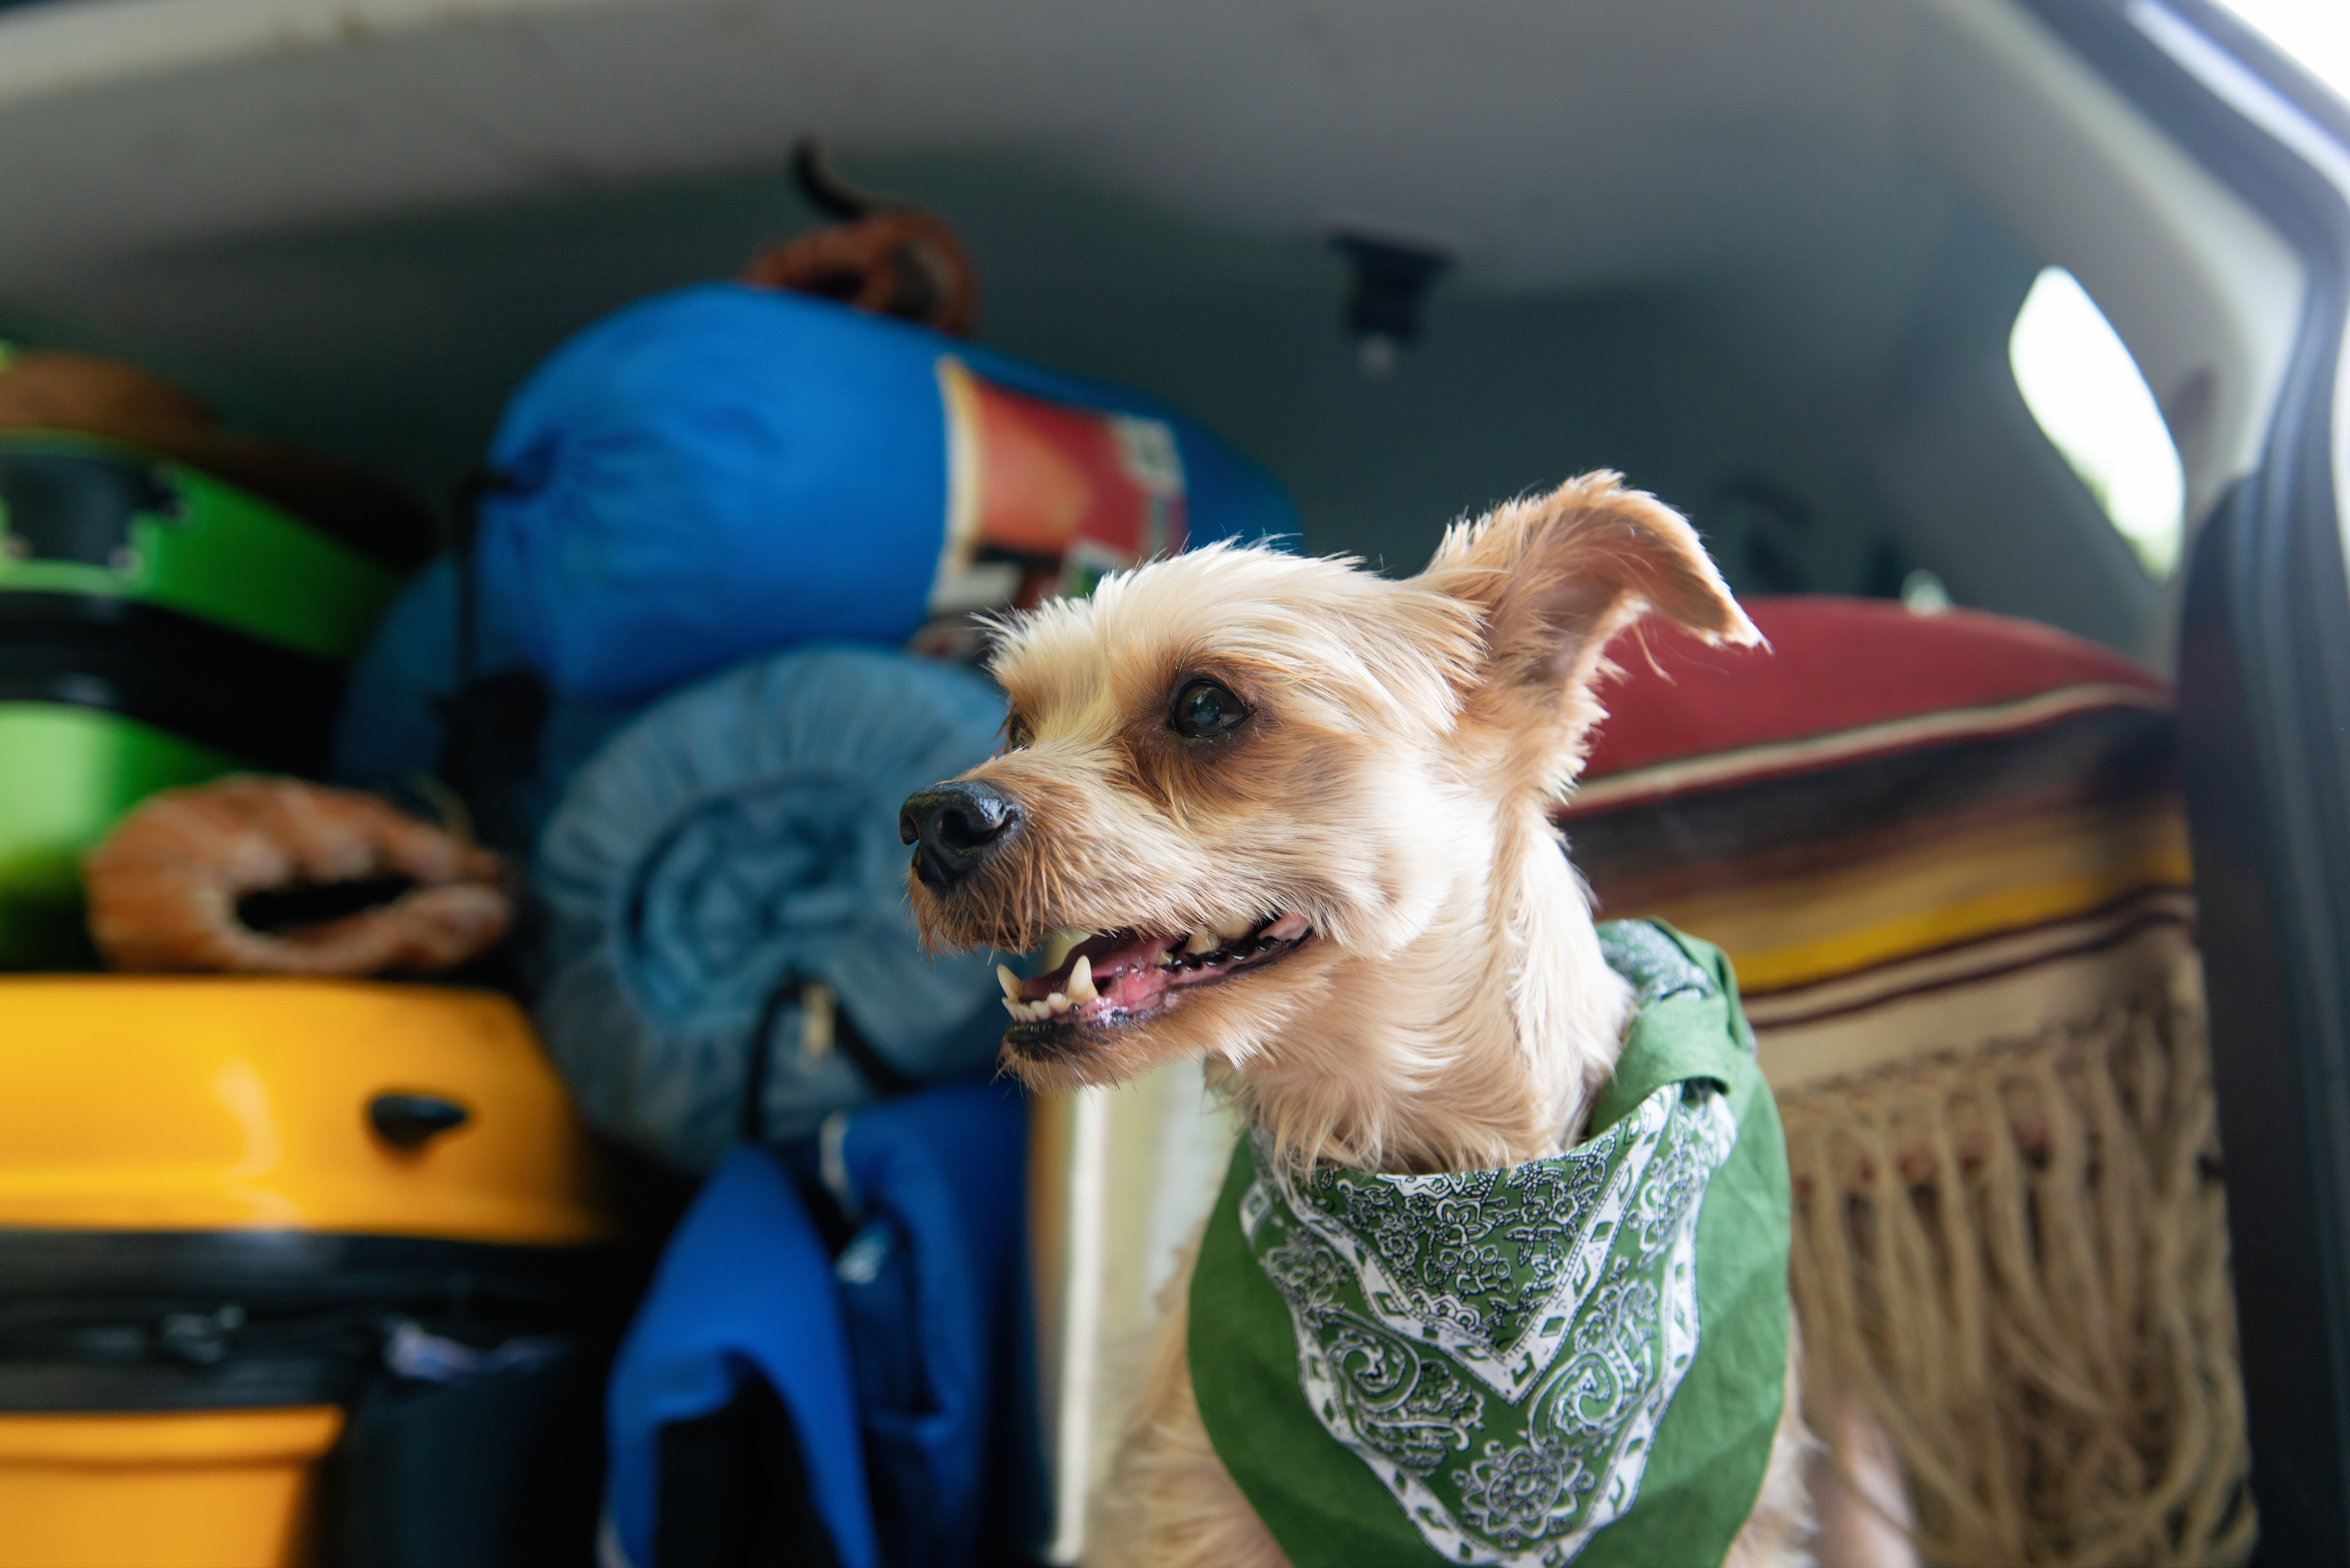 Small white dog wearing a green bandana sitting in the back of a vehicle packed with camping equipment